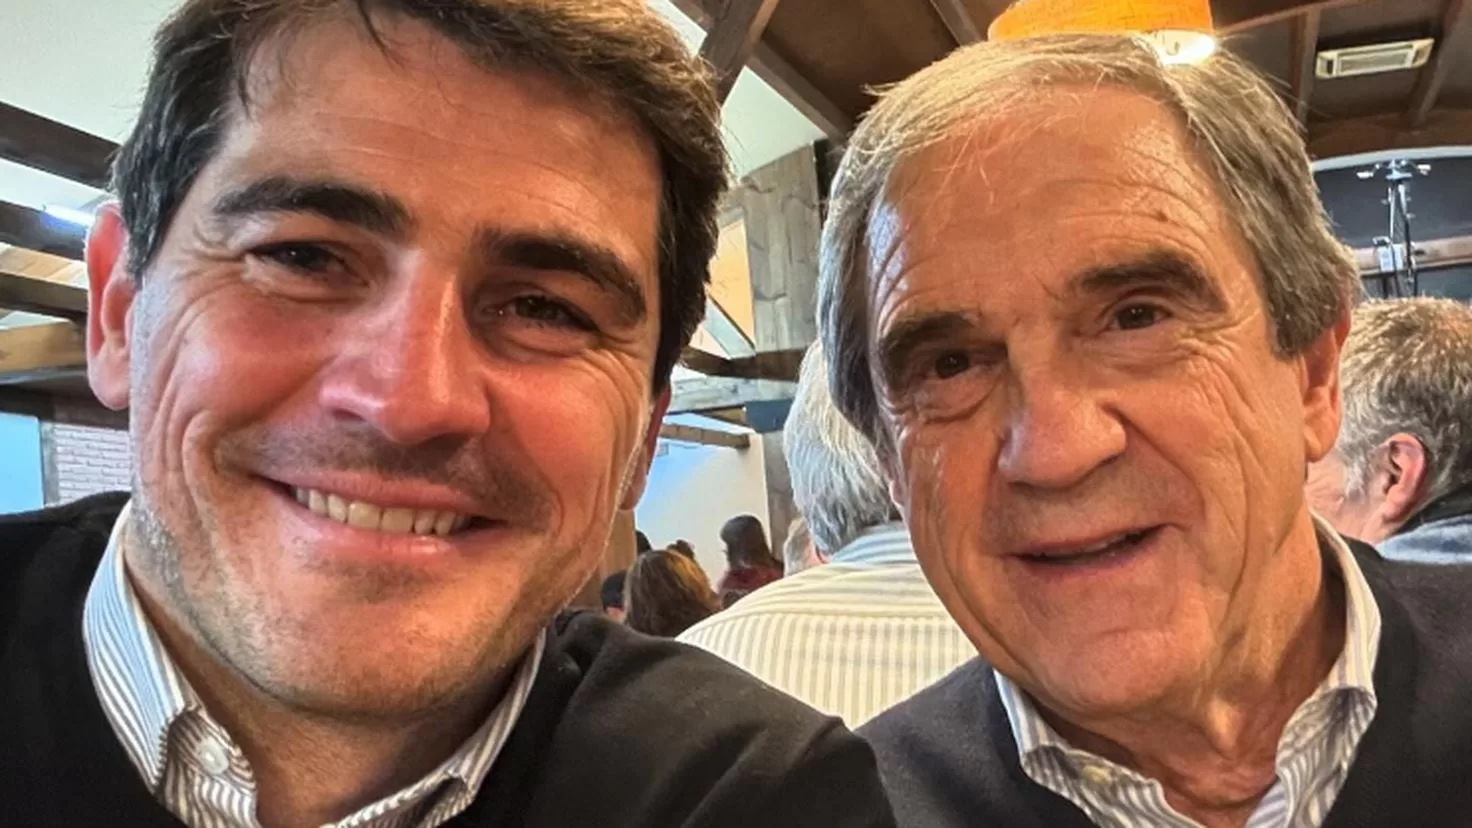 This was the meeting of two legendary goalkeepers: Casillas and Arconada inaugurate a cider house
